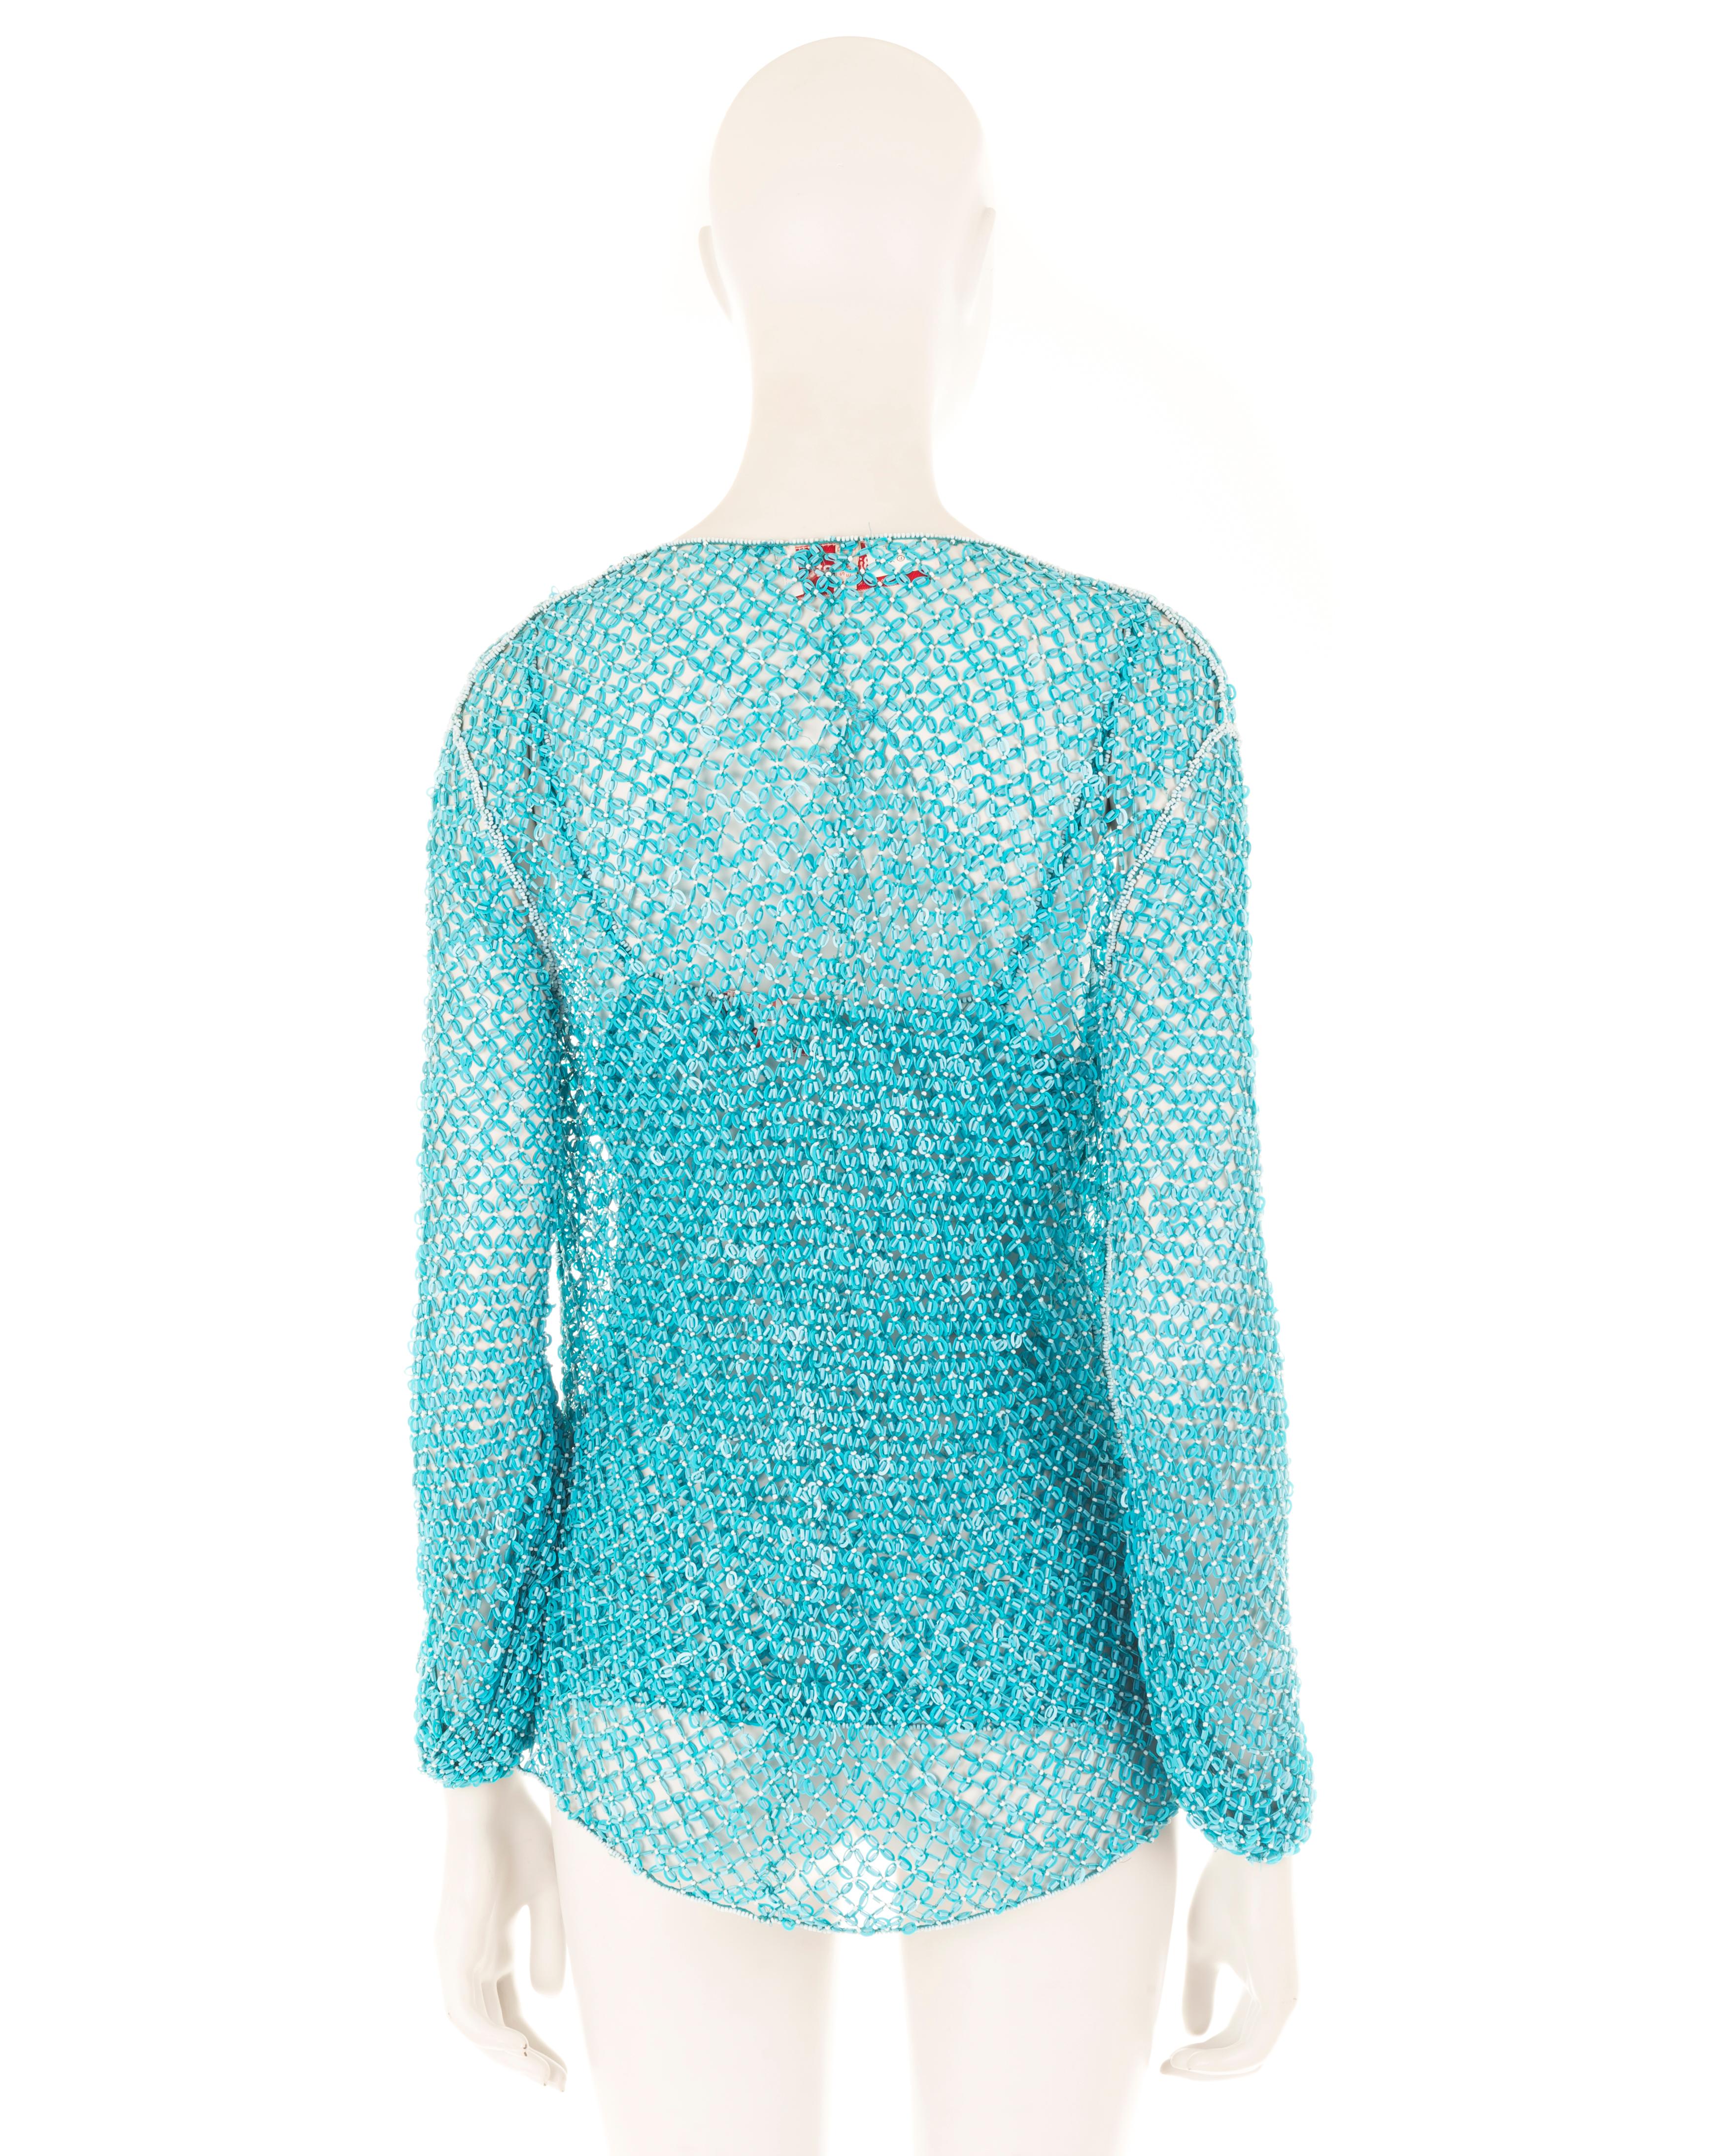 Women's or Men's Laura Biagiotti S/S 2004 blue beaded fishnet cardigan and top set For Sale